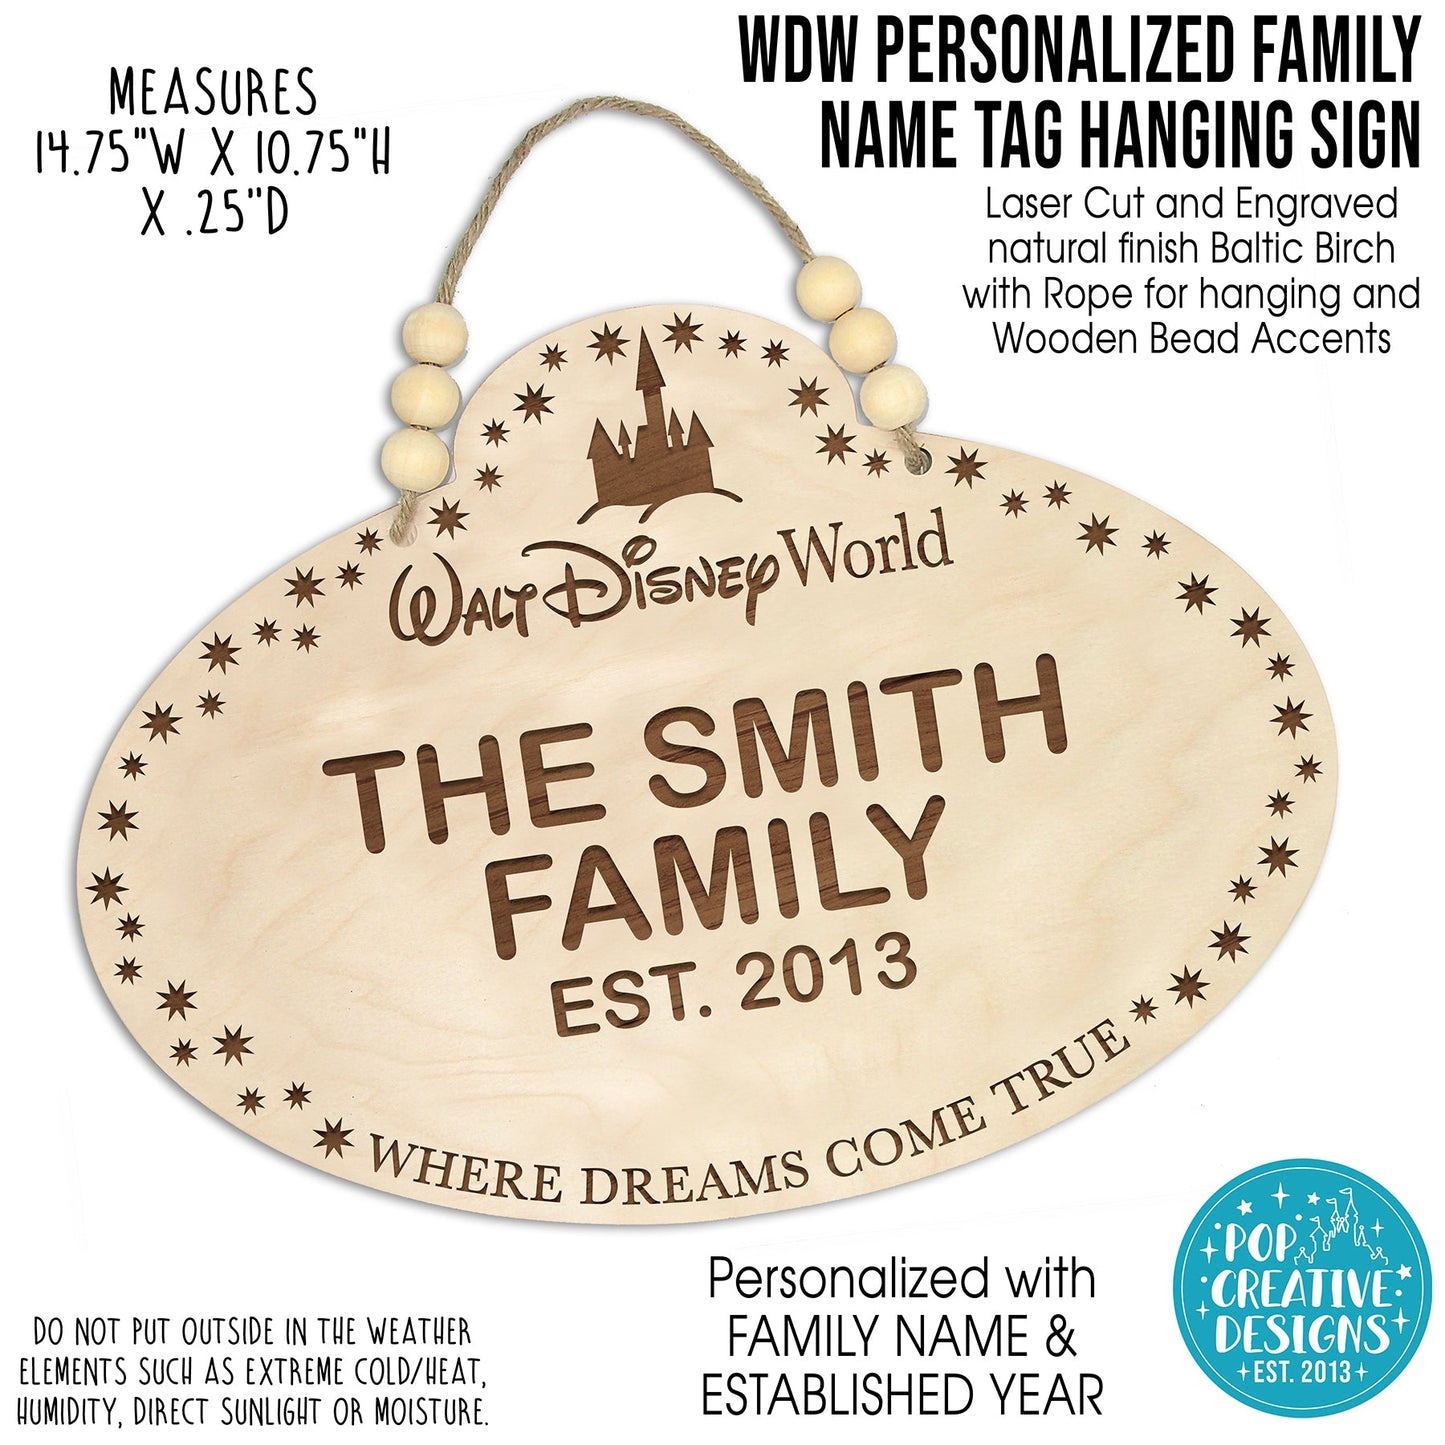 WDW Personalized Family Name Tag Hanging Sign - FREE SHIPPING